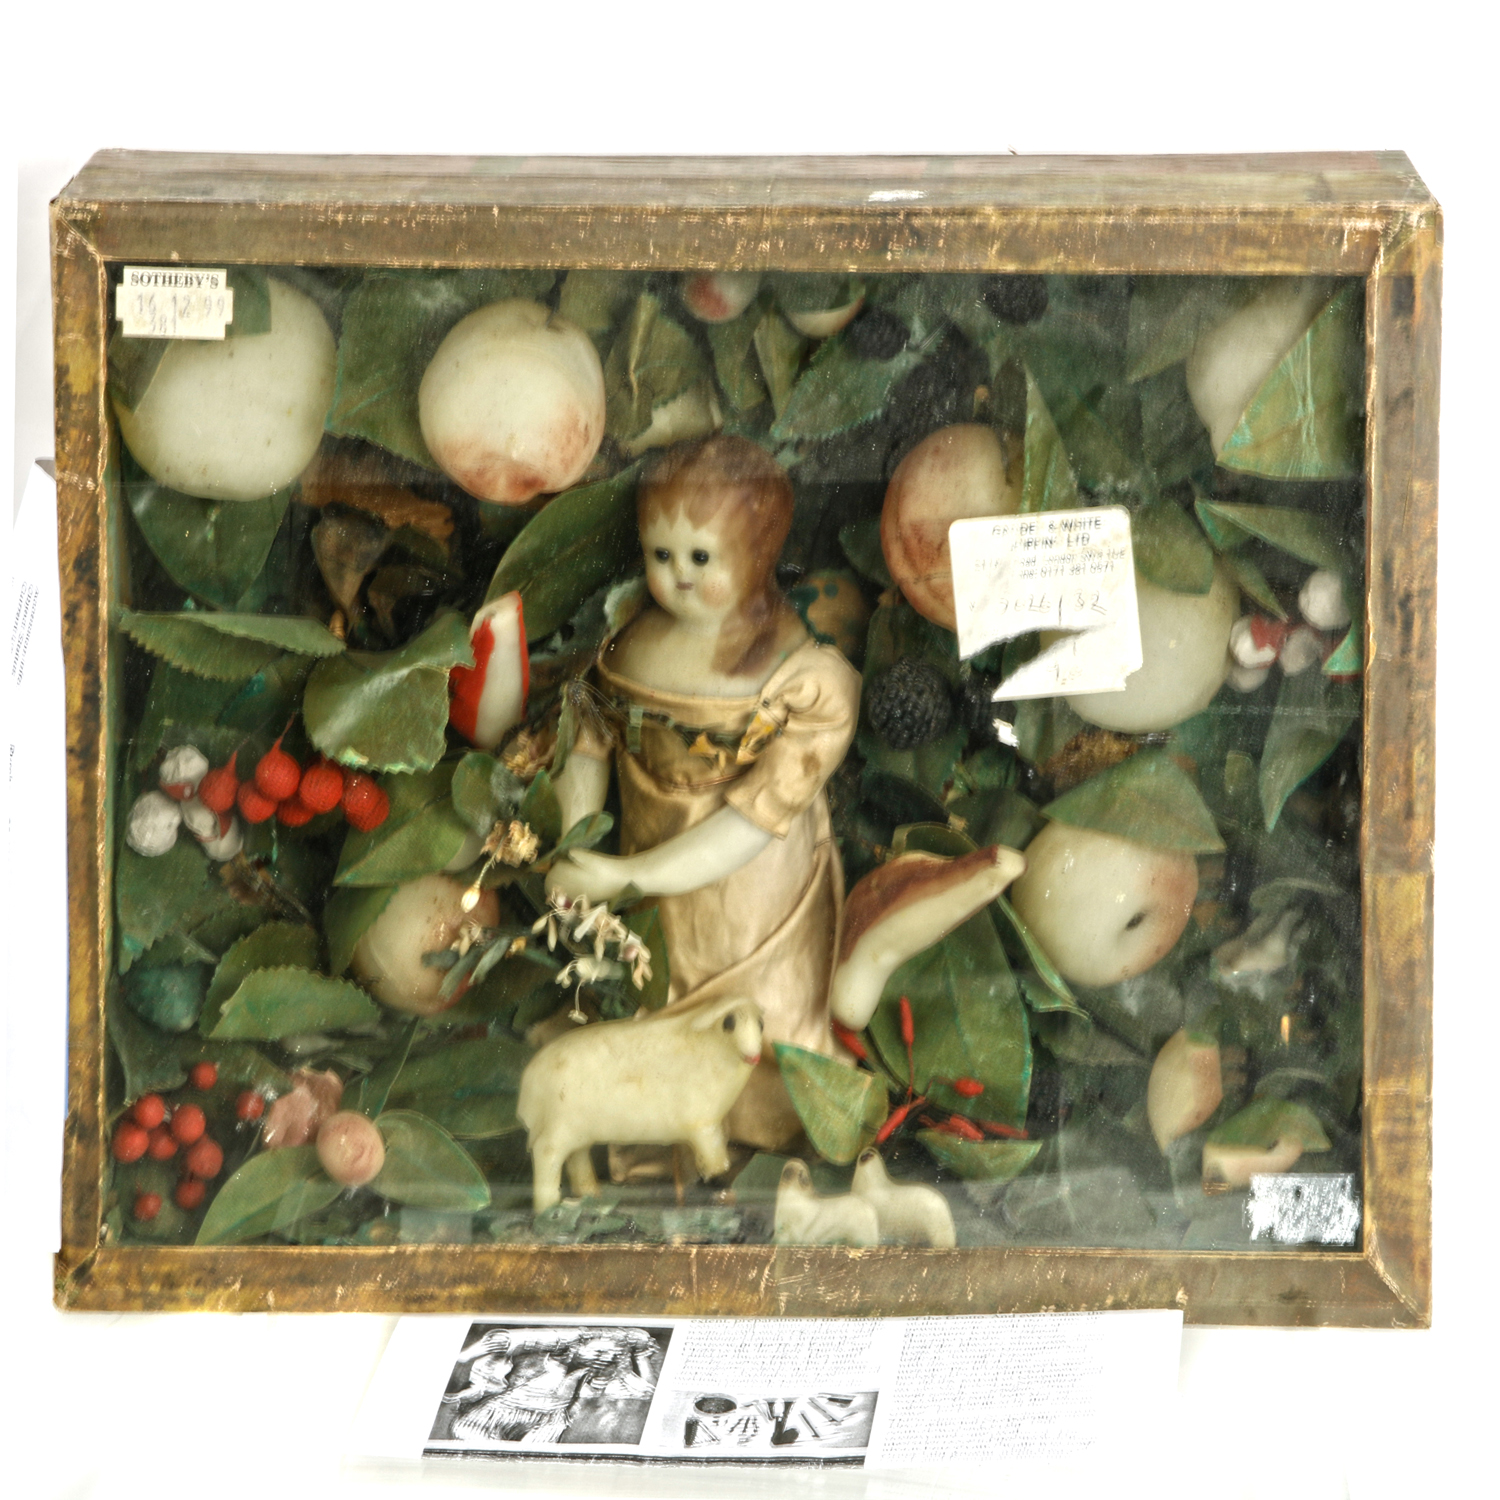 A SHADOW BOX WITH WAX BABY A shadow 3a4d89